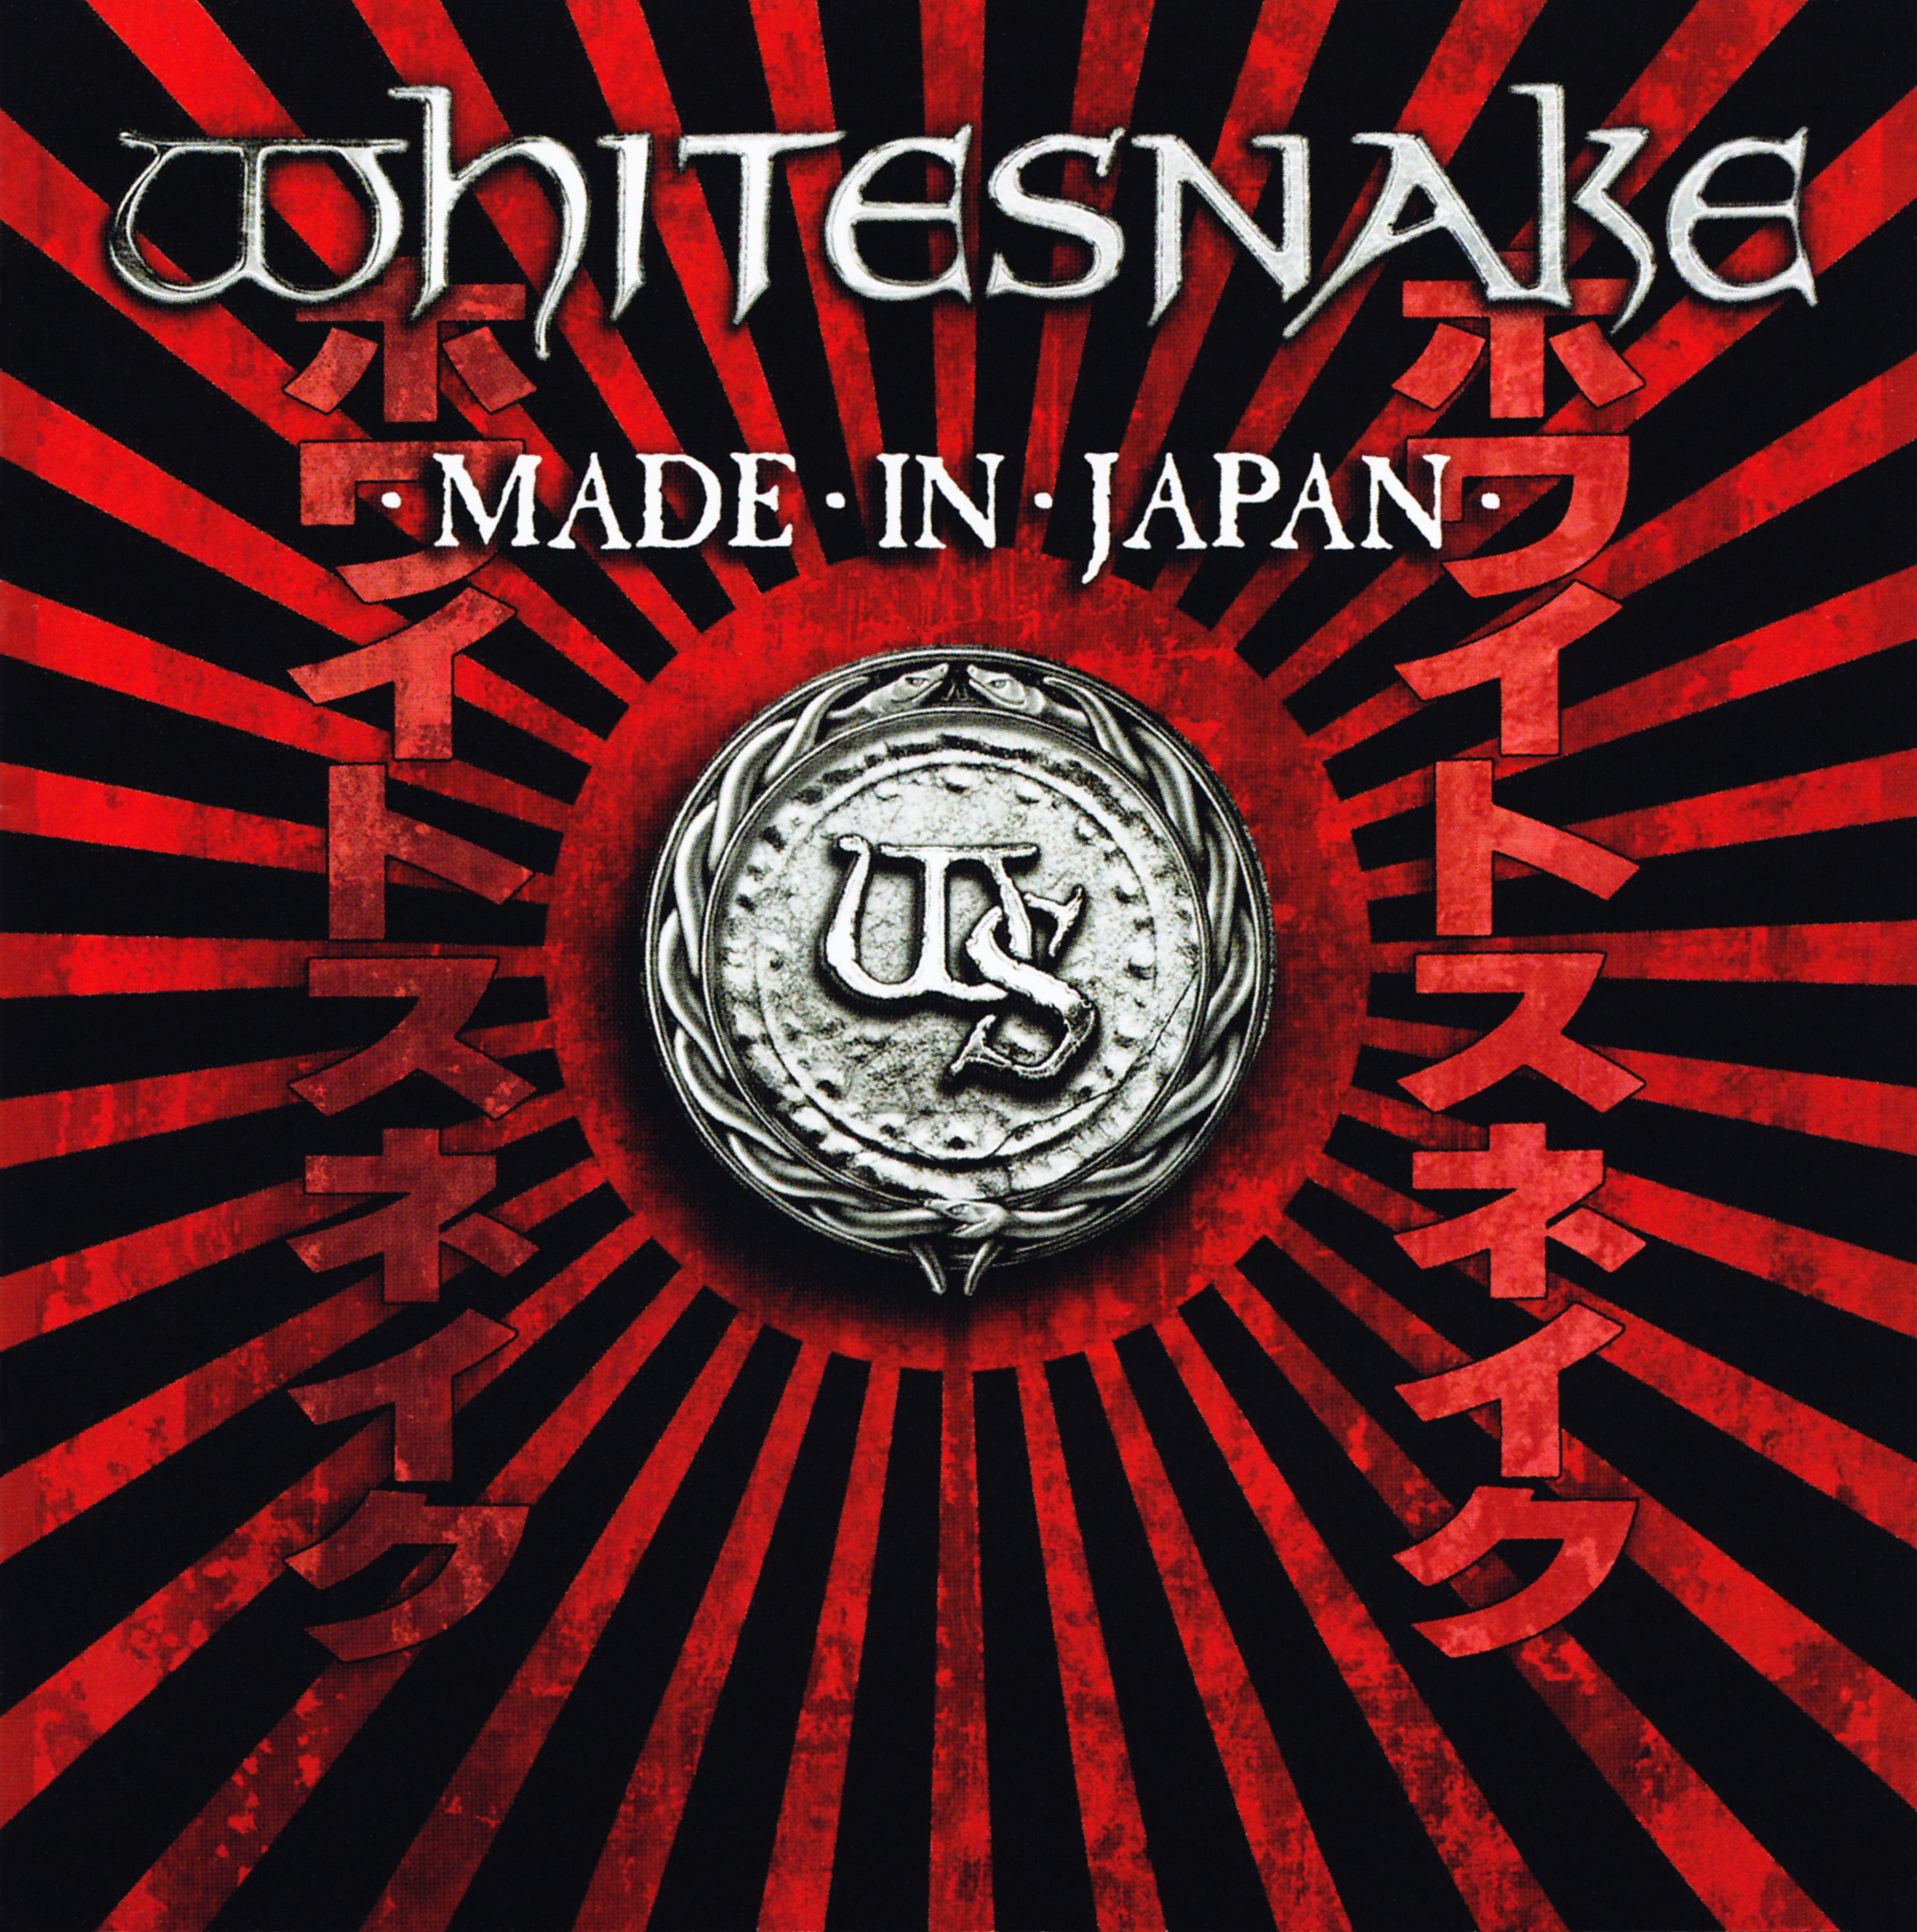 MADE IN JAPAN cover art